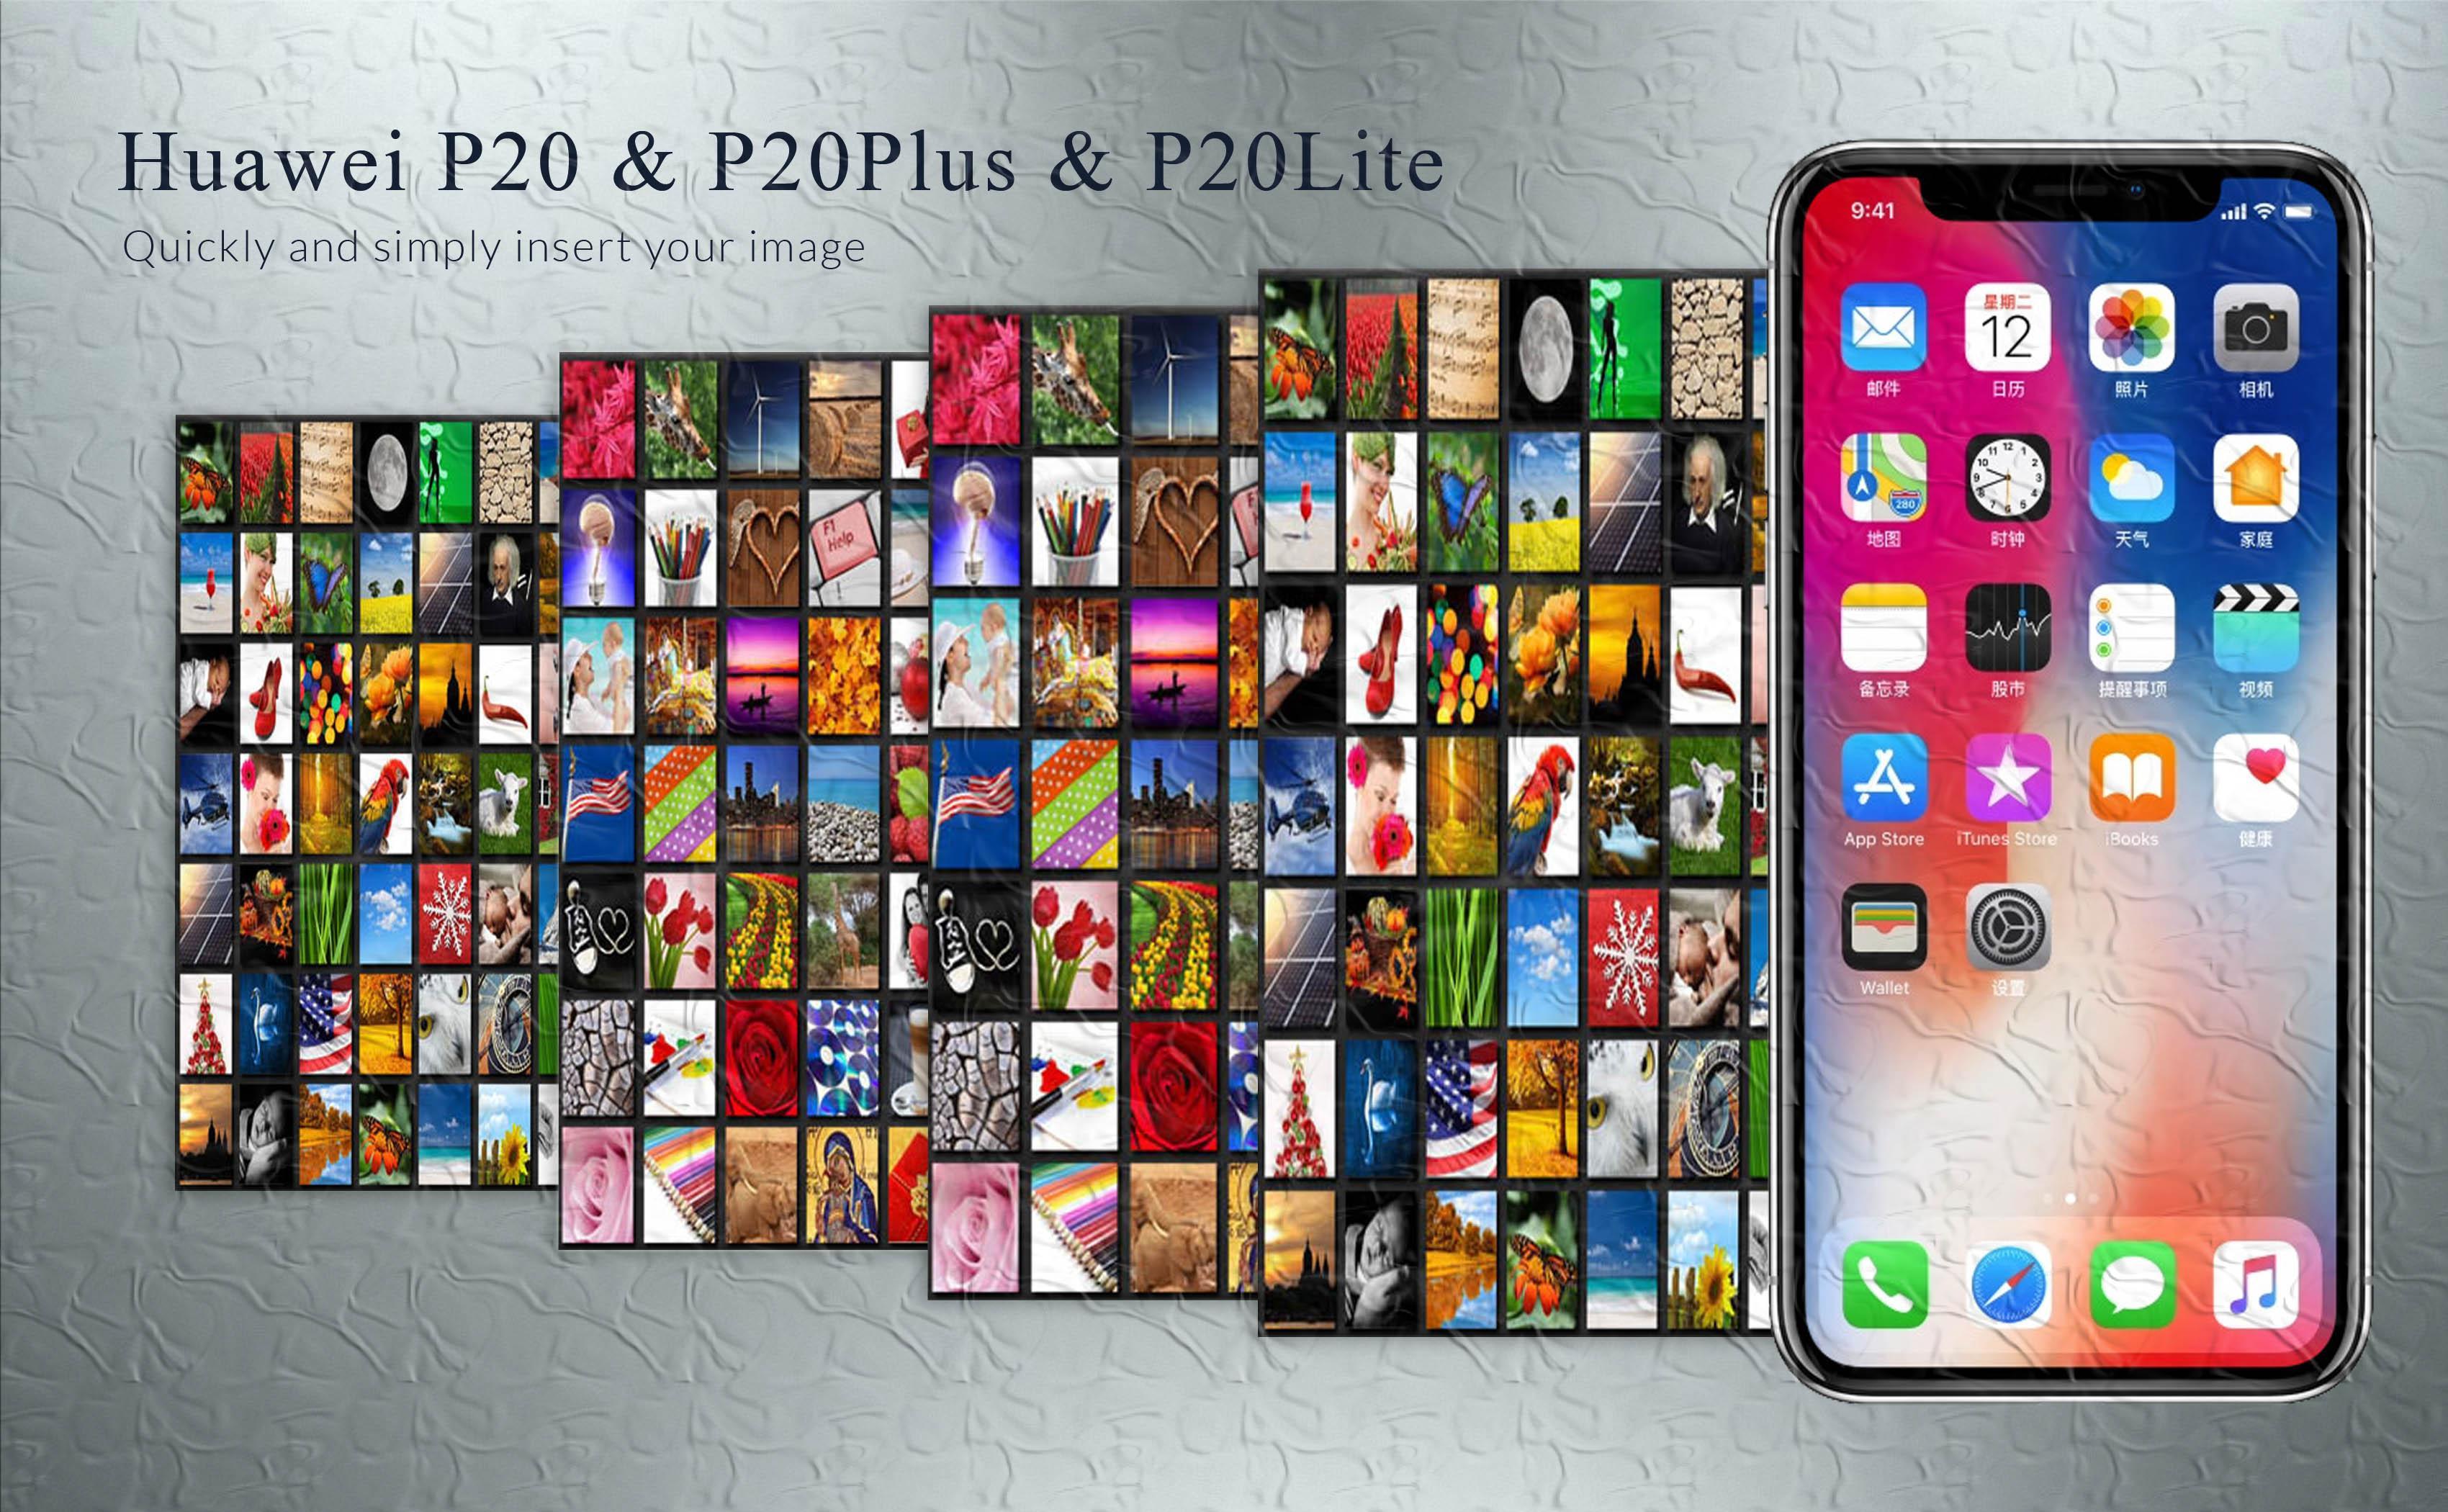 2k18 Huawei P P Pro P Lite Wallpaper For Android Apk Download